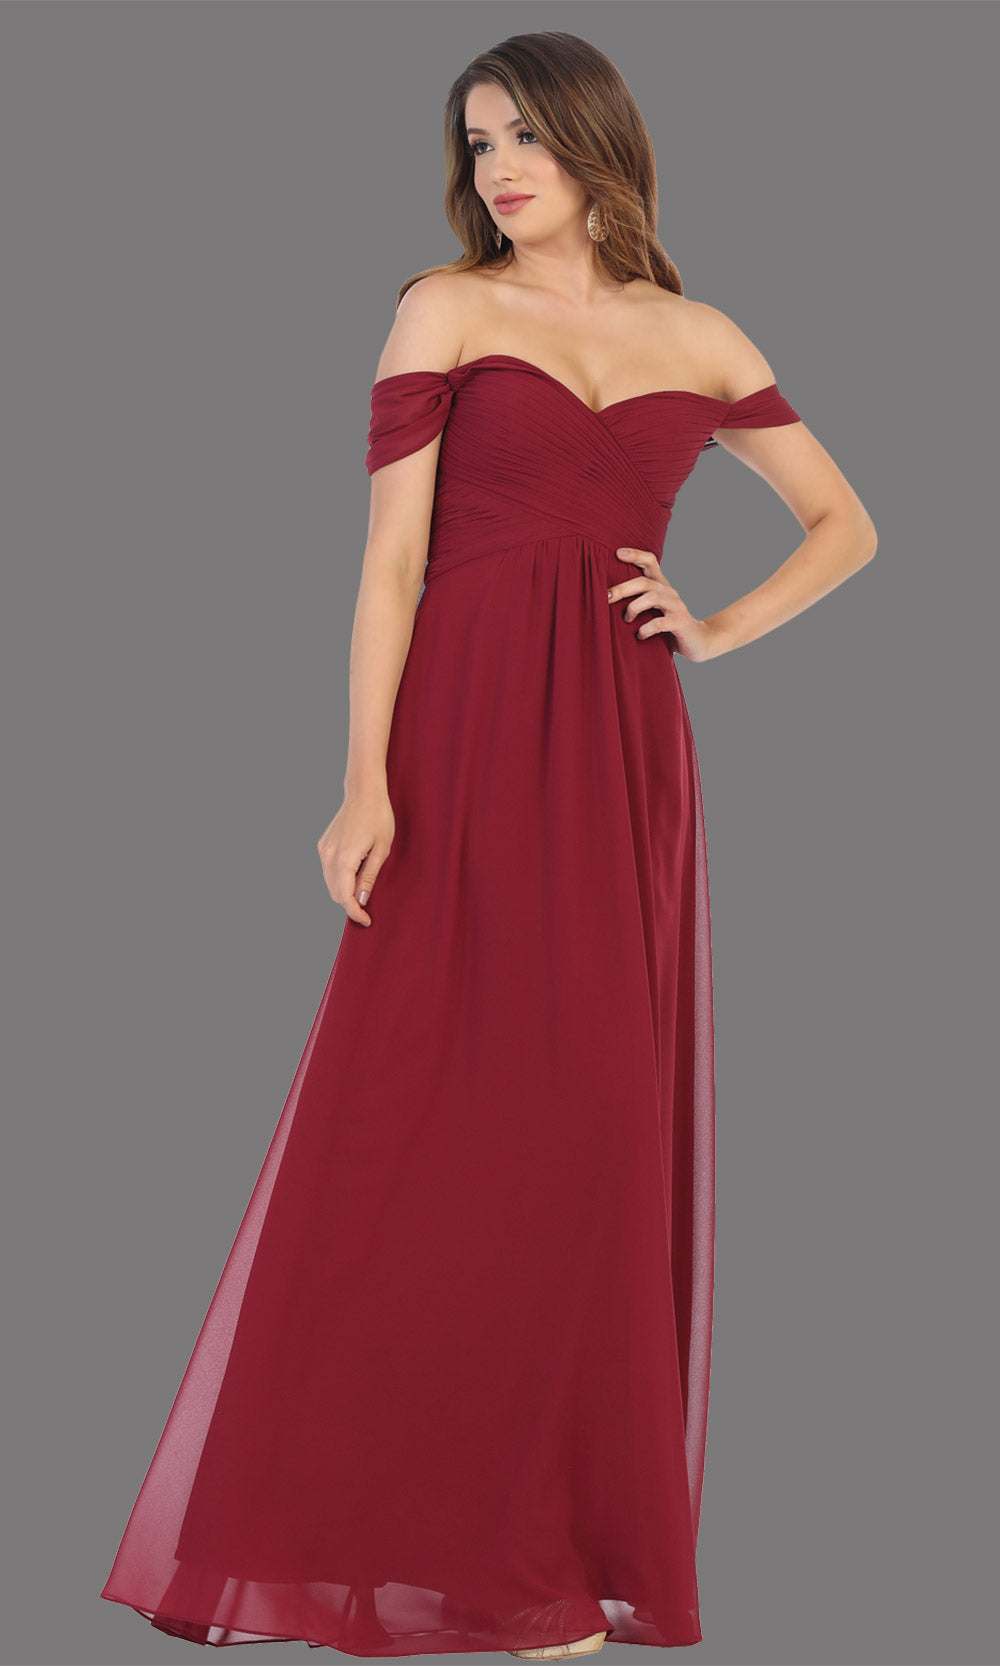 Mayqueen MQ1711 long burgundy flowy off shoulder dress. This dark red dress is perfect for bridesmaid dresses, simple wedding guest dress, prom dress, gala, black tie wedding. Plus sizes are available, evening party dress.jpg